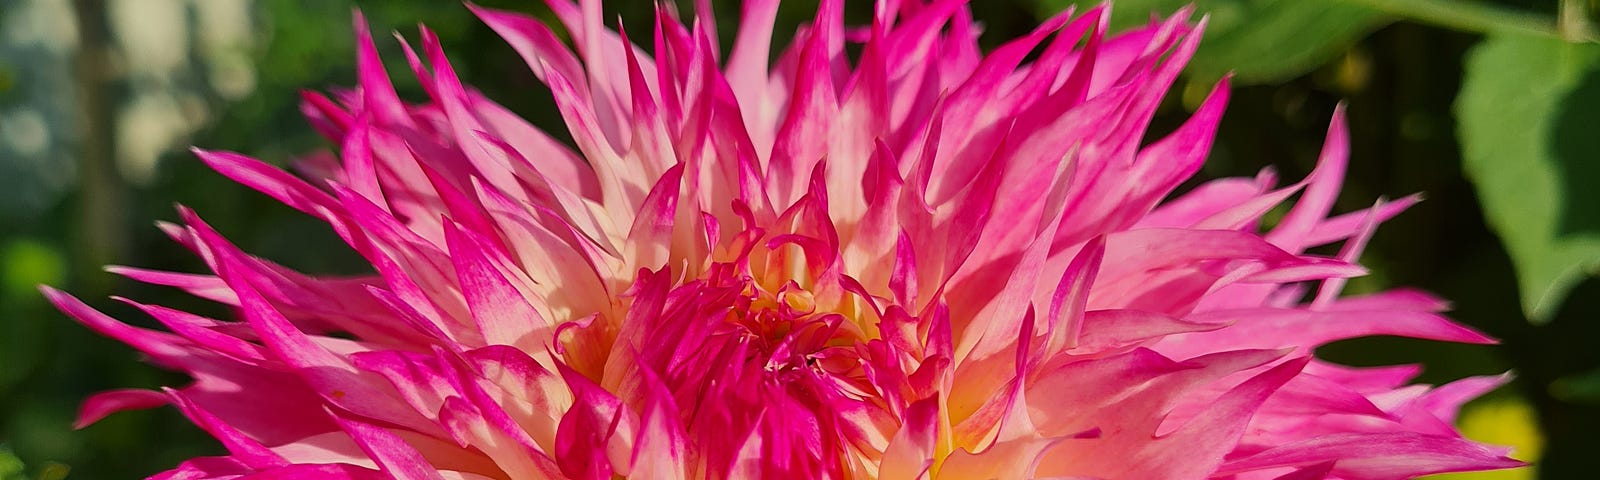 A bright pink Fimbriata Frilly dahlia flower in the sun